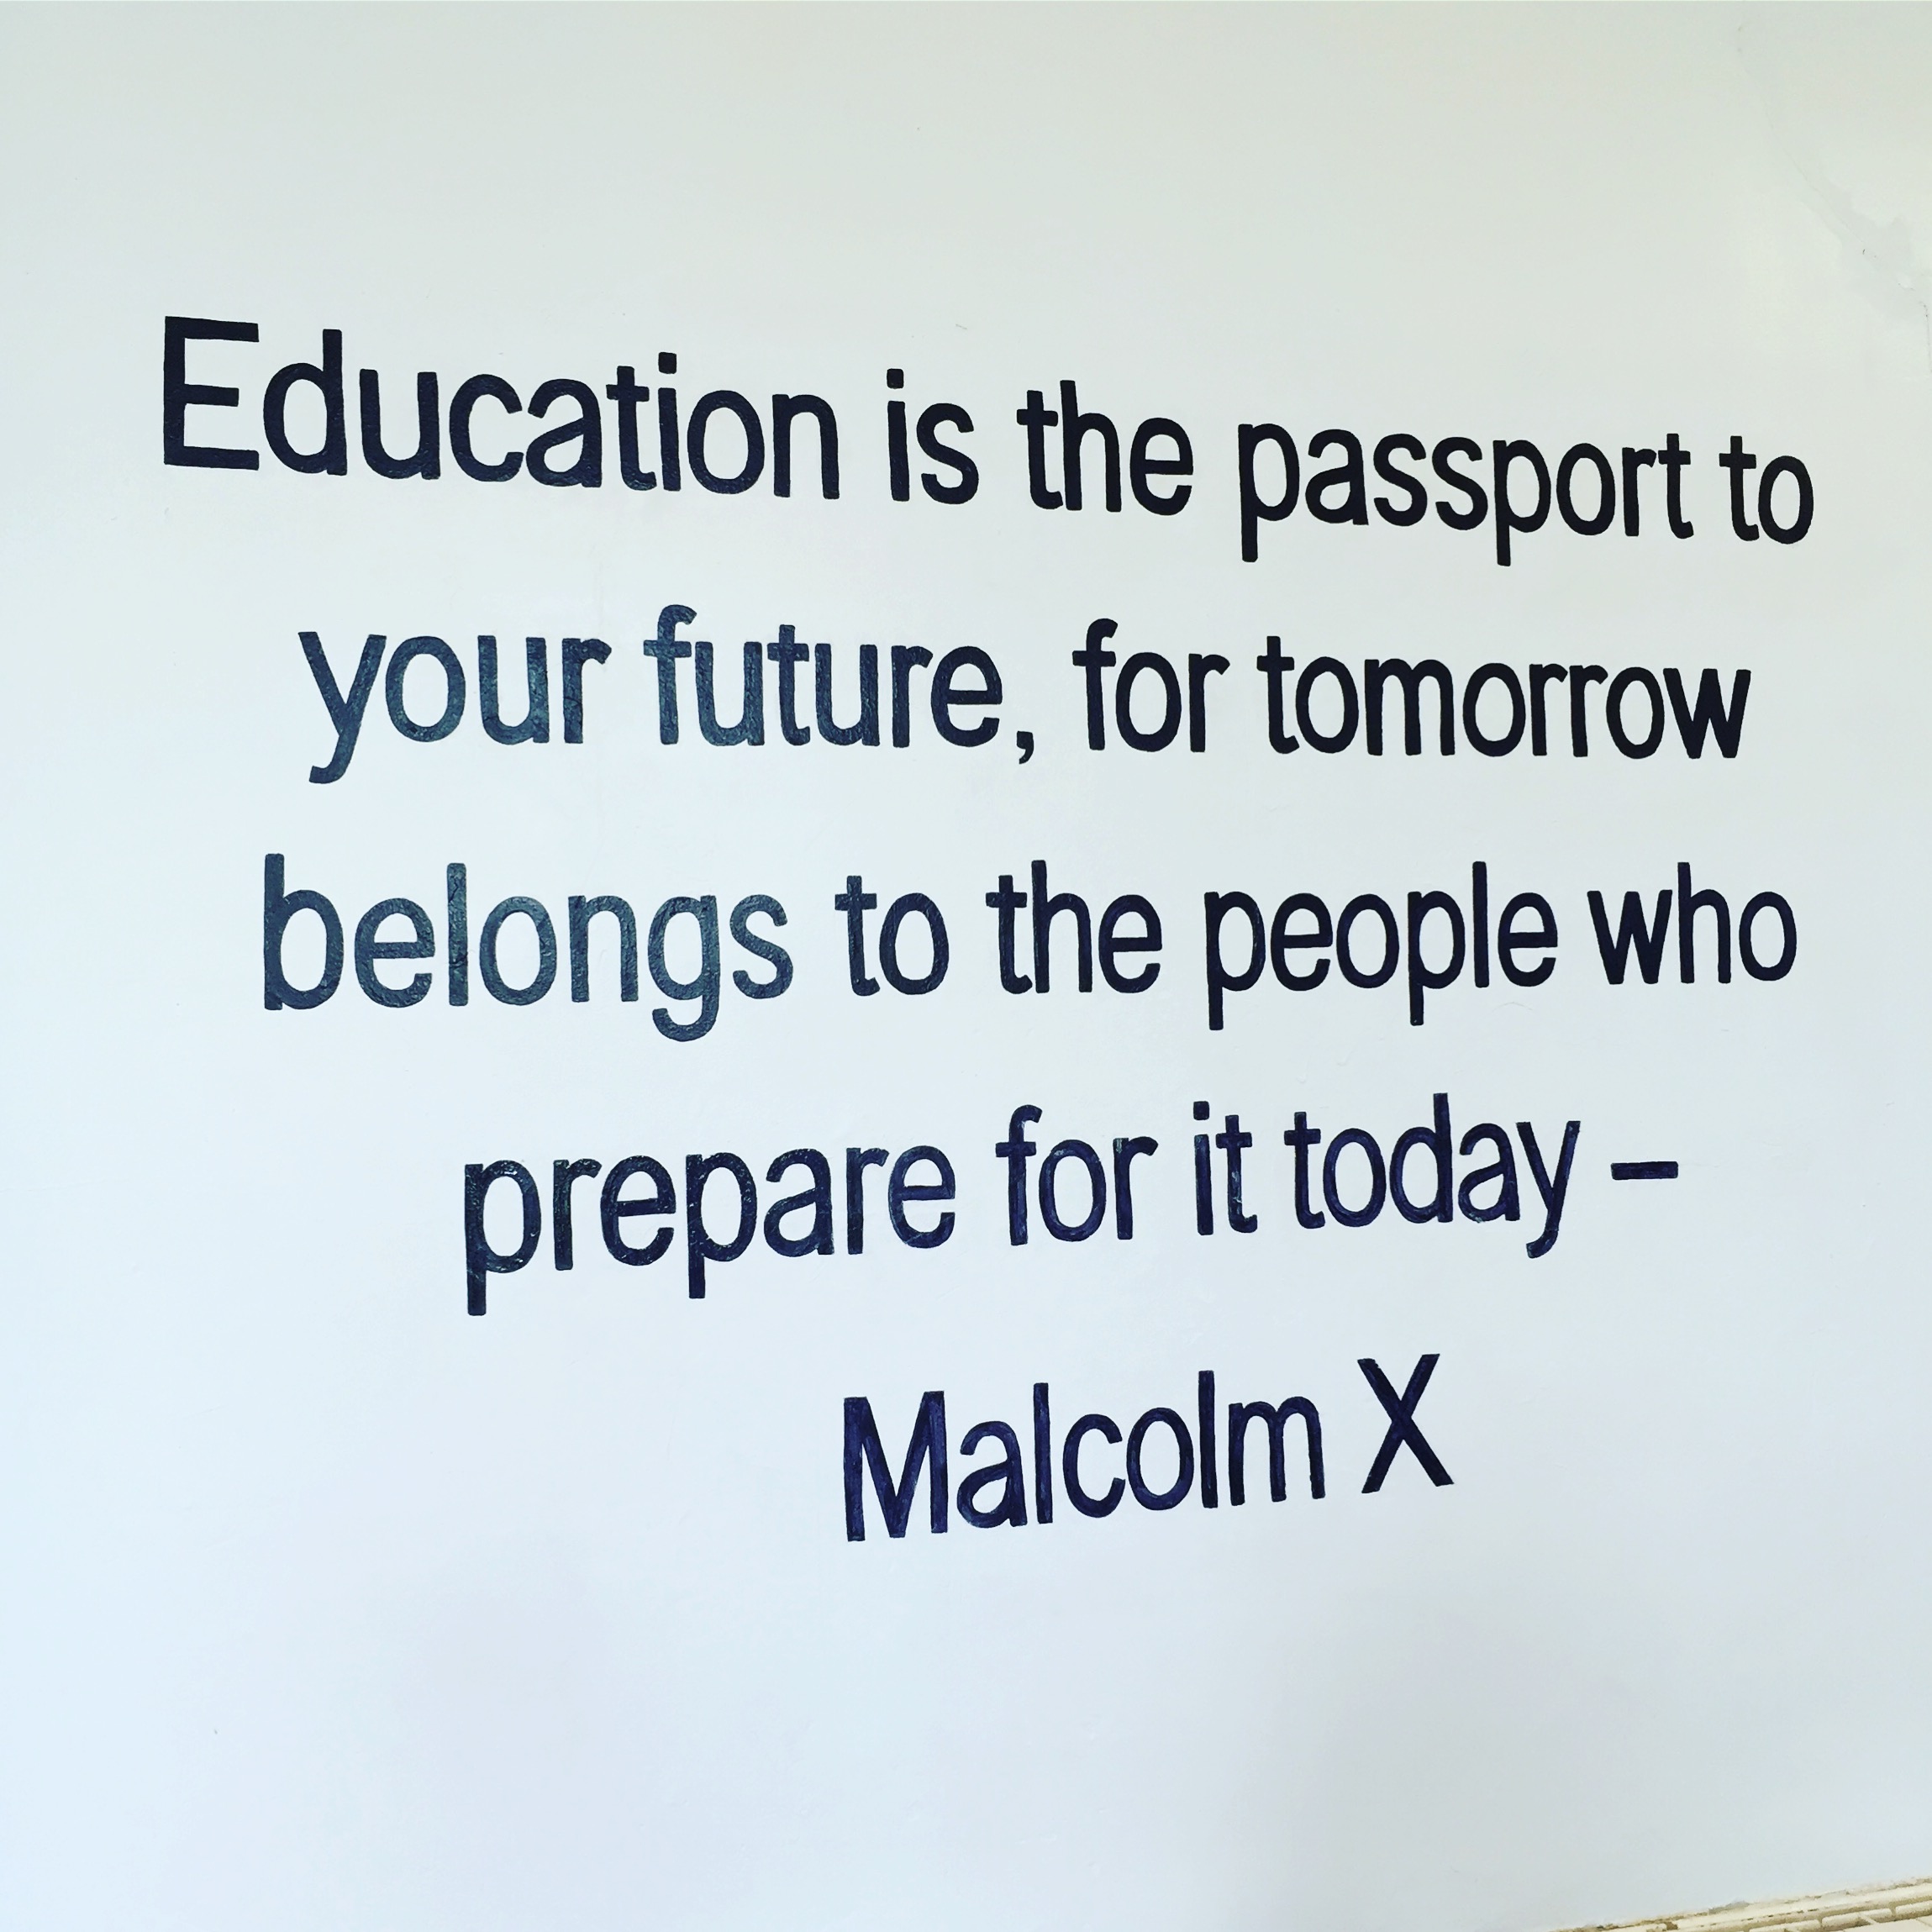 Educational quote painted to inspire students in a secondary school